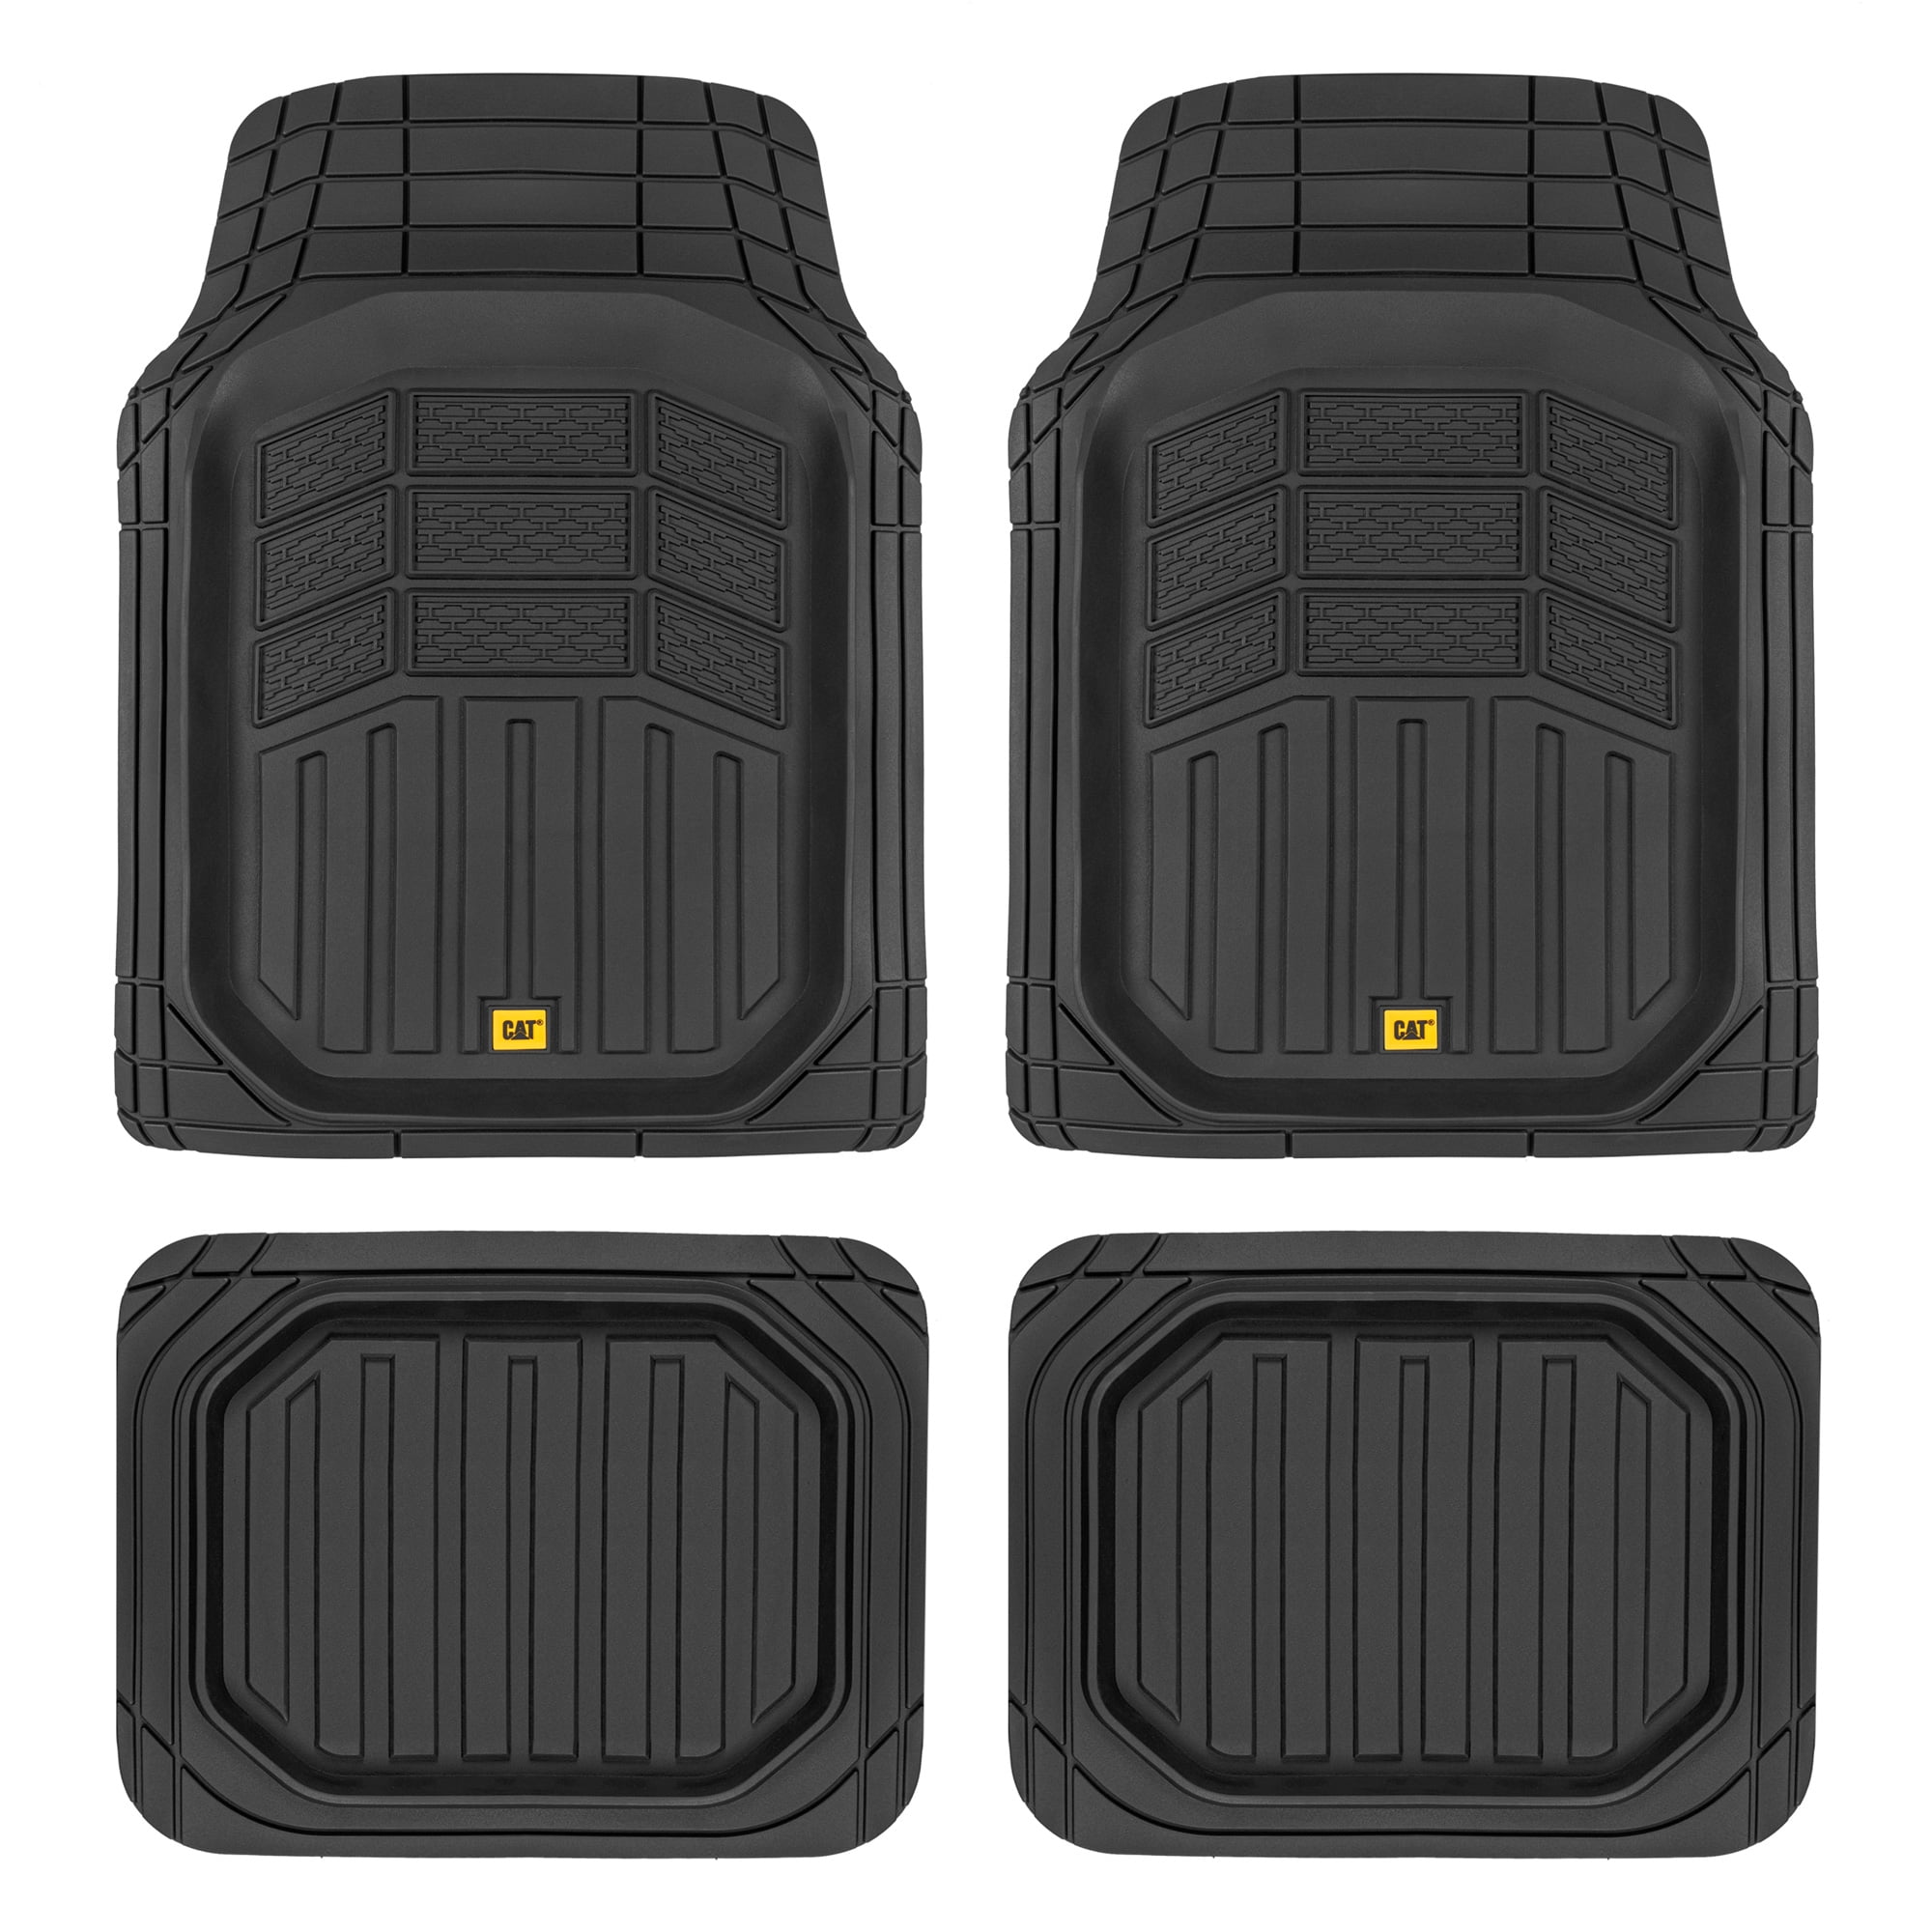 Bdk Cat CAMT-9014 (4-Piece) Large Deep Dish Rubber Car Floor Mats with Trunk Cargo Liner, Universal Trim to Fit Front & Rear Combo Set for Car